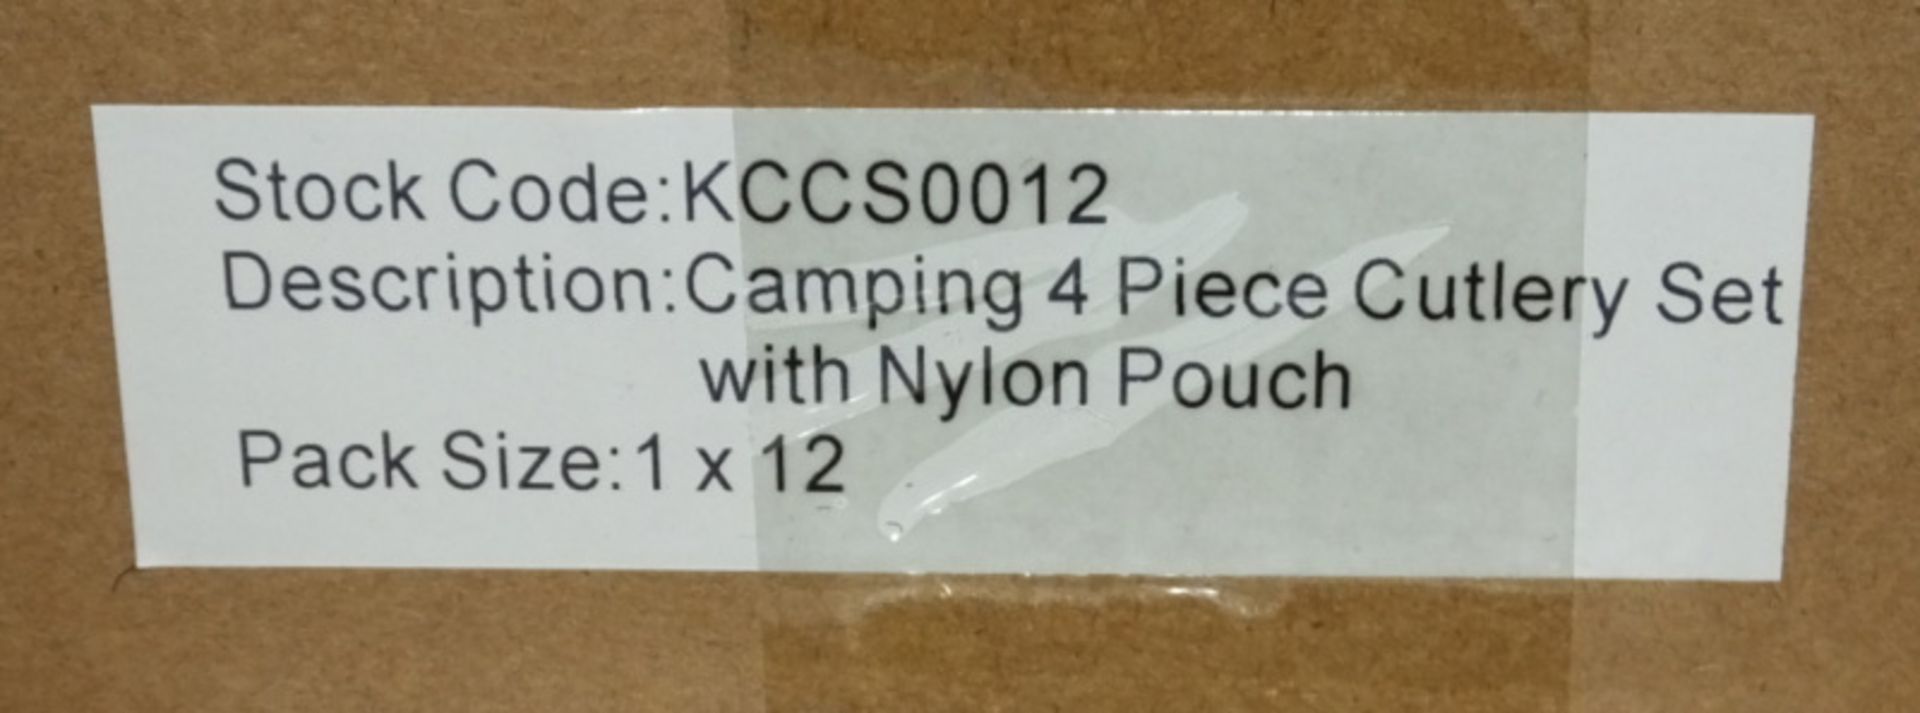 Camping 4 piece cutlery sets with nylon pouch - 12 per box - 4 boxes - Image 3 of 3